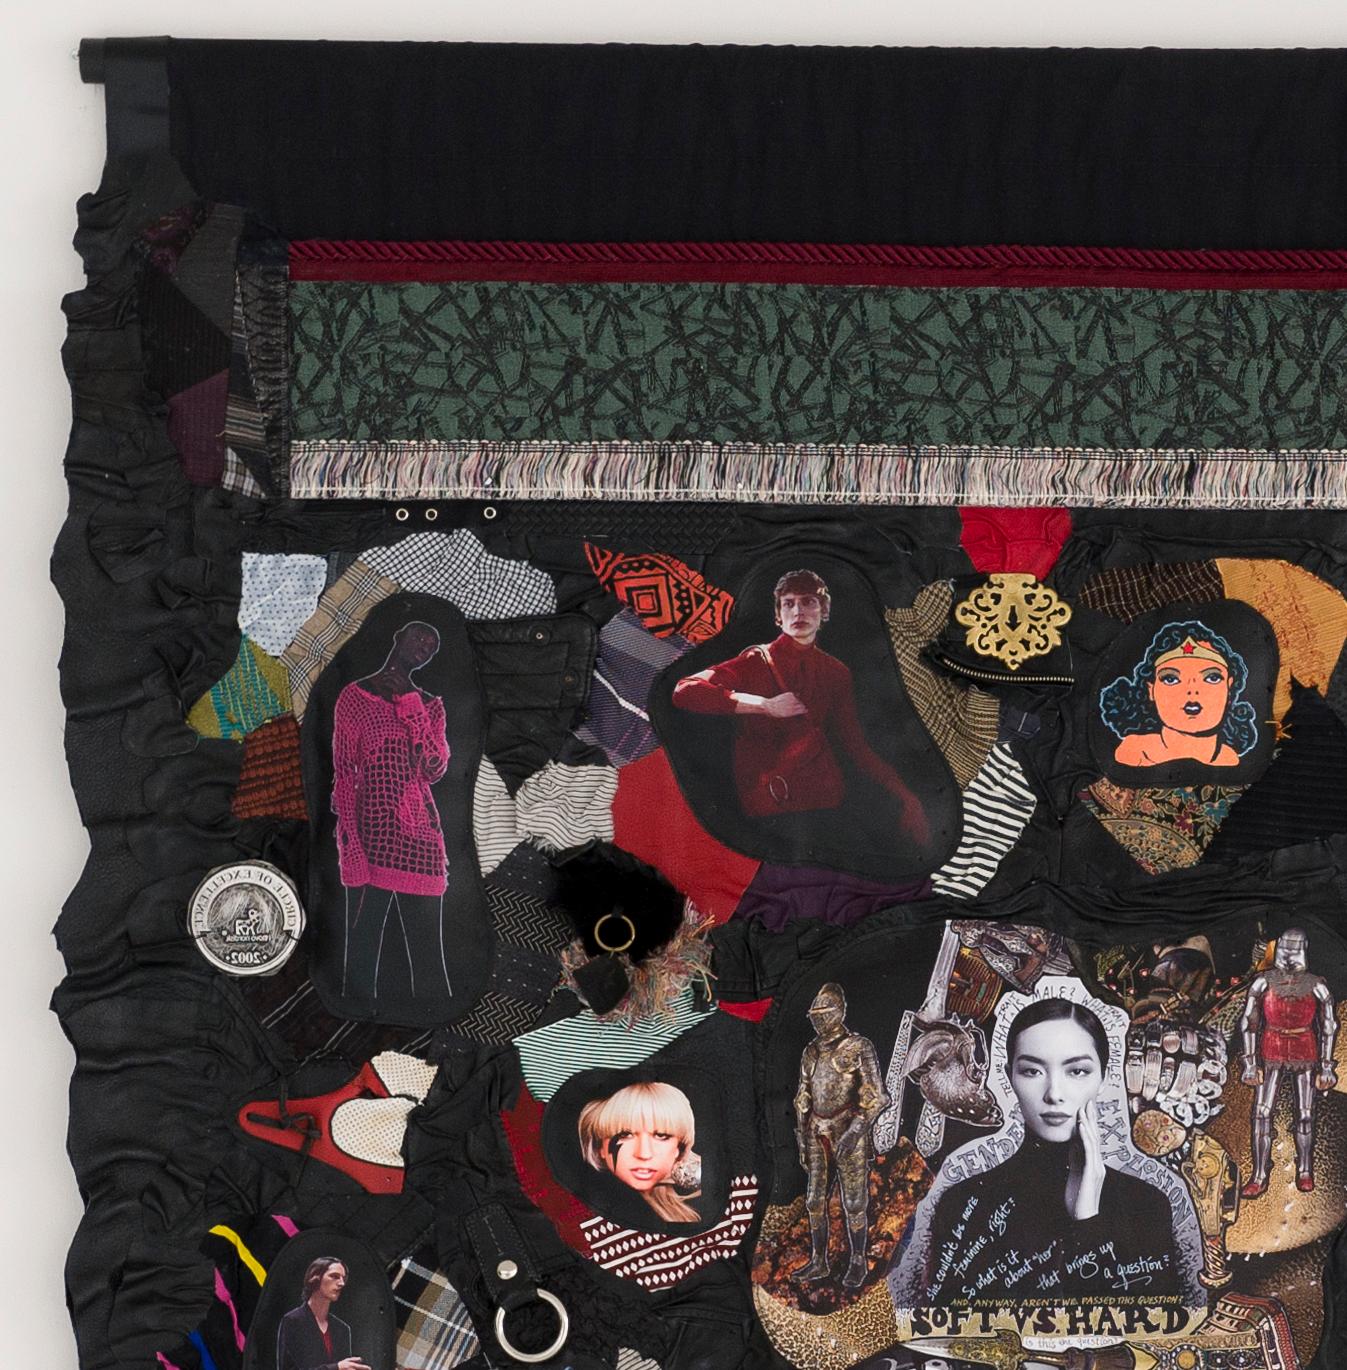 Linda Stein, Masculinities: Soft vs. Strong 860 - Feminist Contemporary Sculptural Tapestry 

Masculinities: Soft vs. Strong 860 is from Linda Stein's Sexism series, which advocates an expanded perspective of gender constructions--one that includes